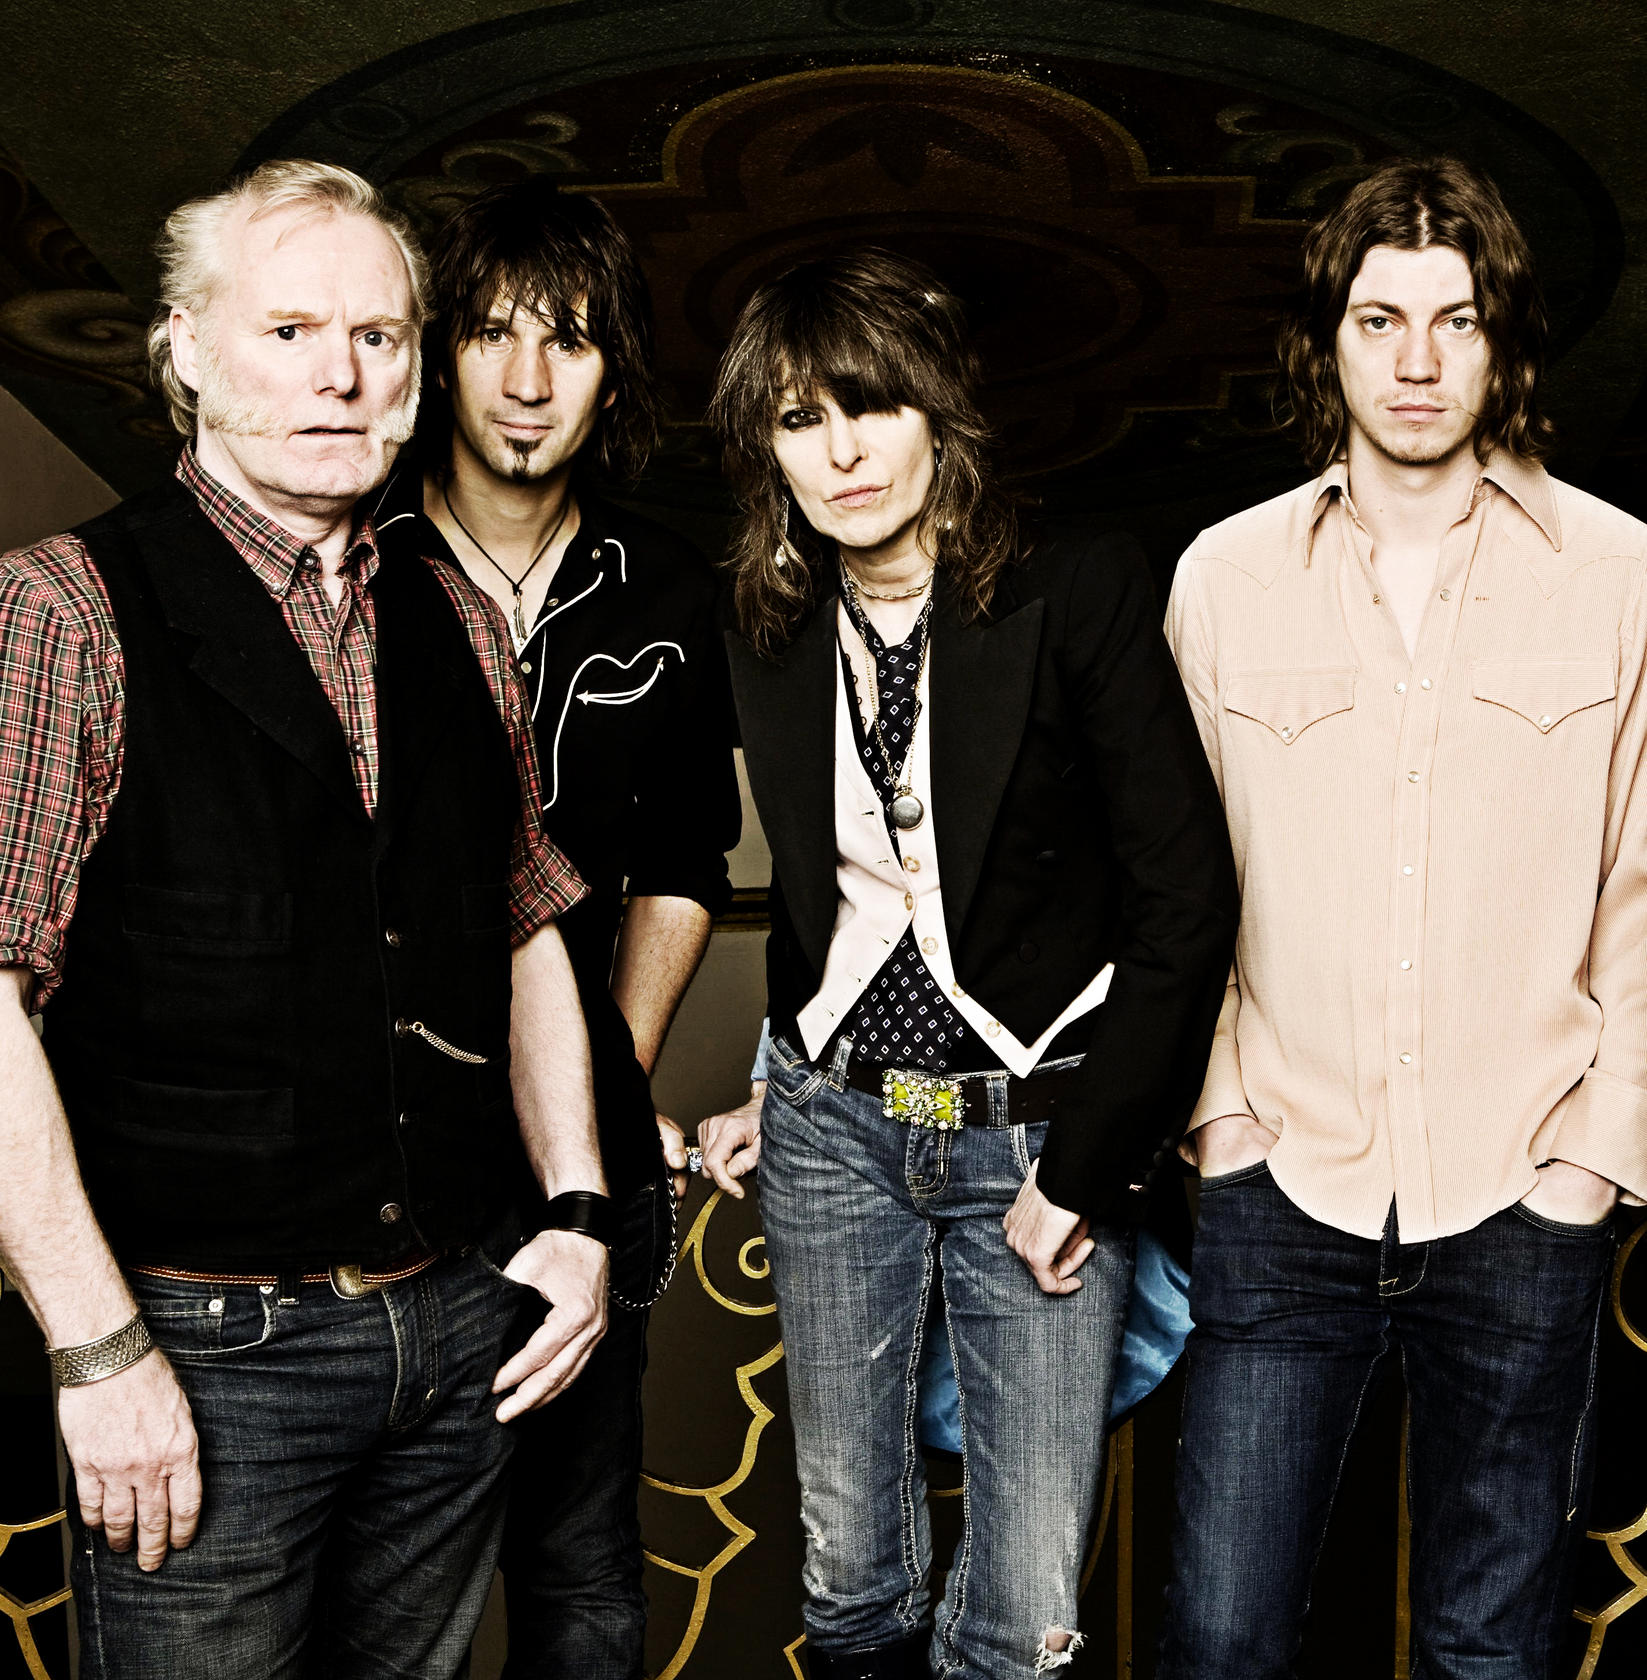 Chrissie Hynde with bandmates (from left) Martin Chambers, Nick Wilkinson and James Walbourne